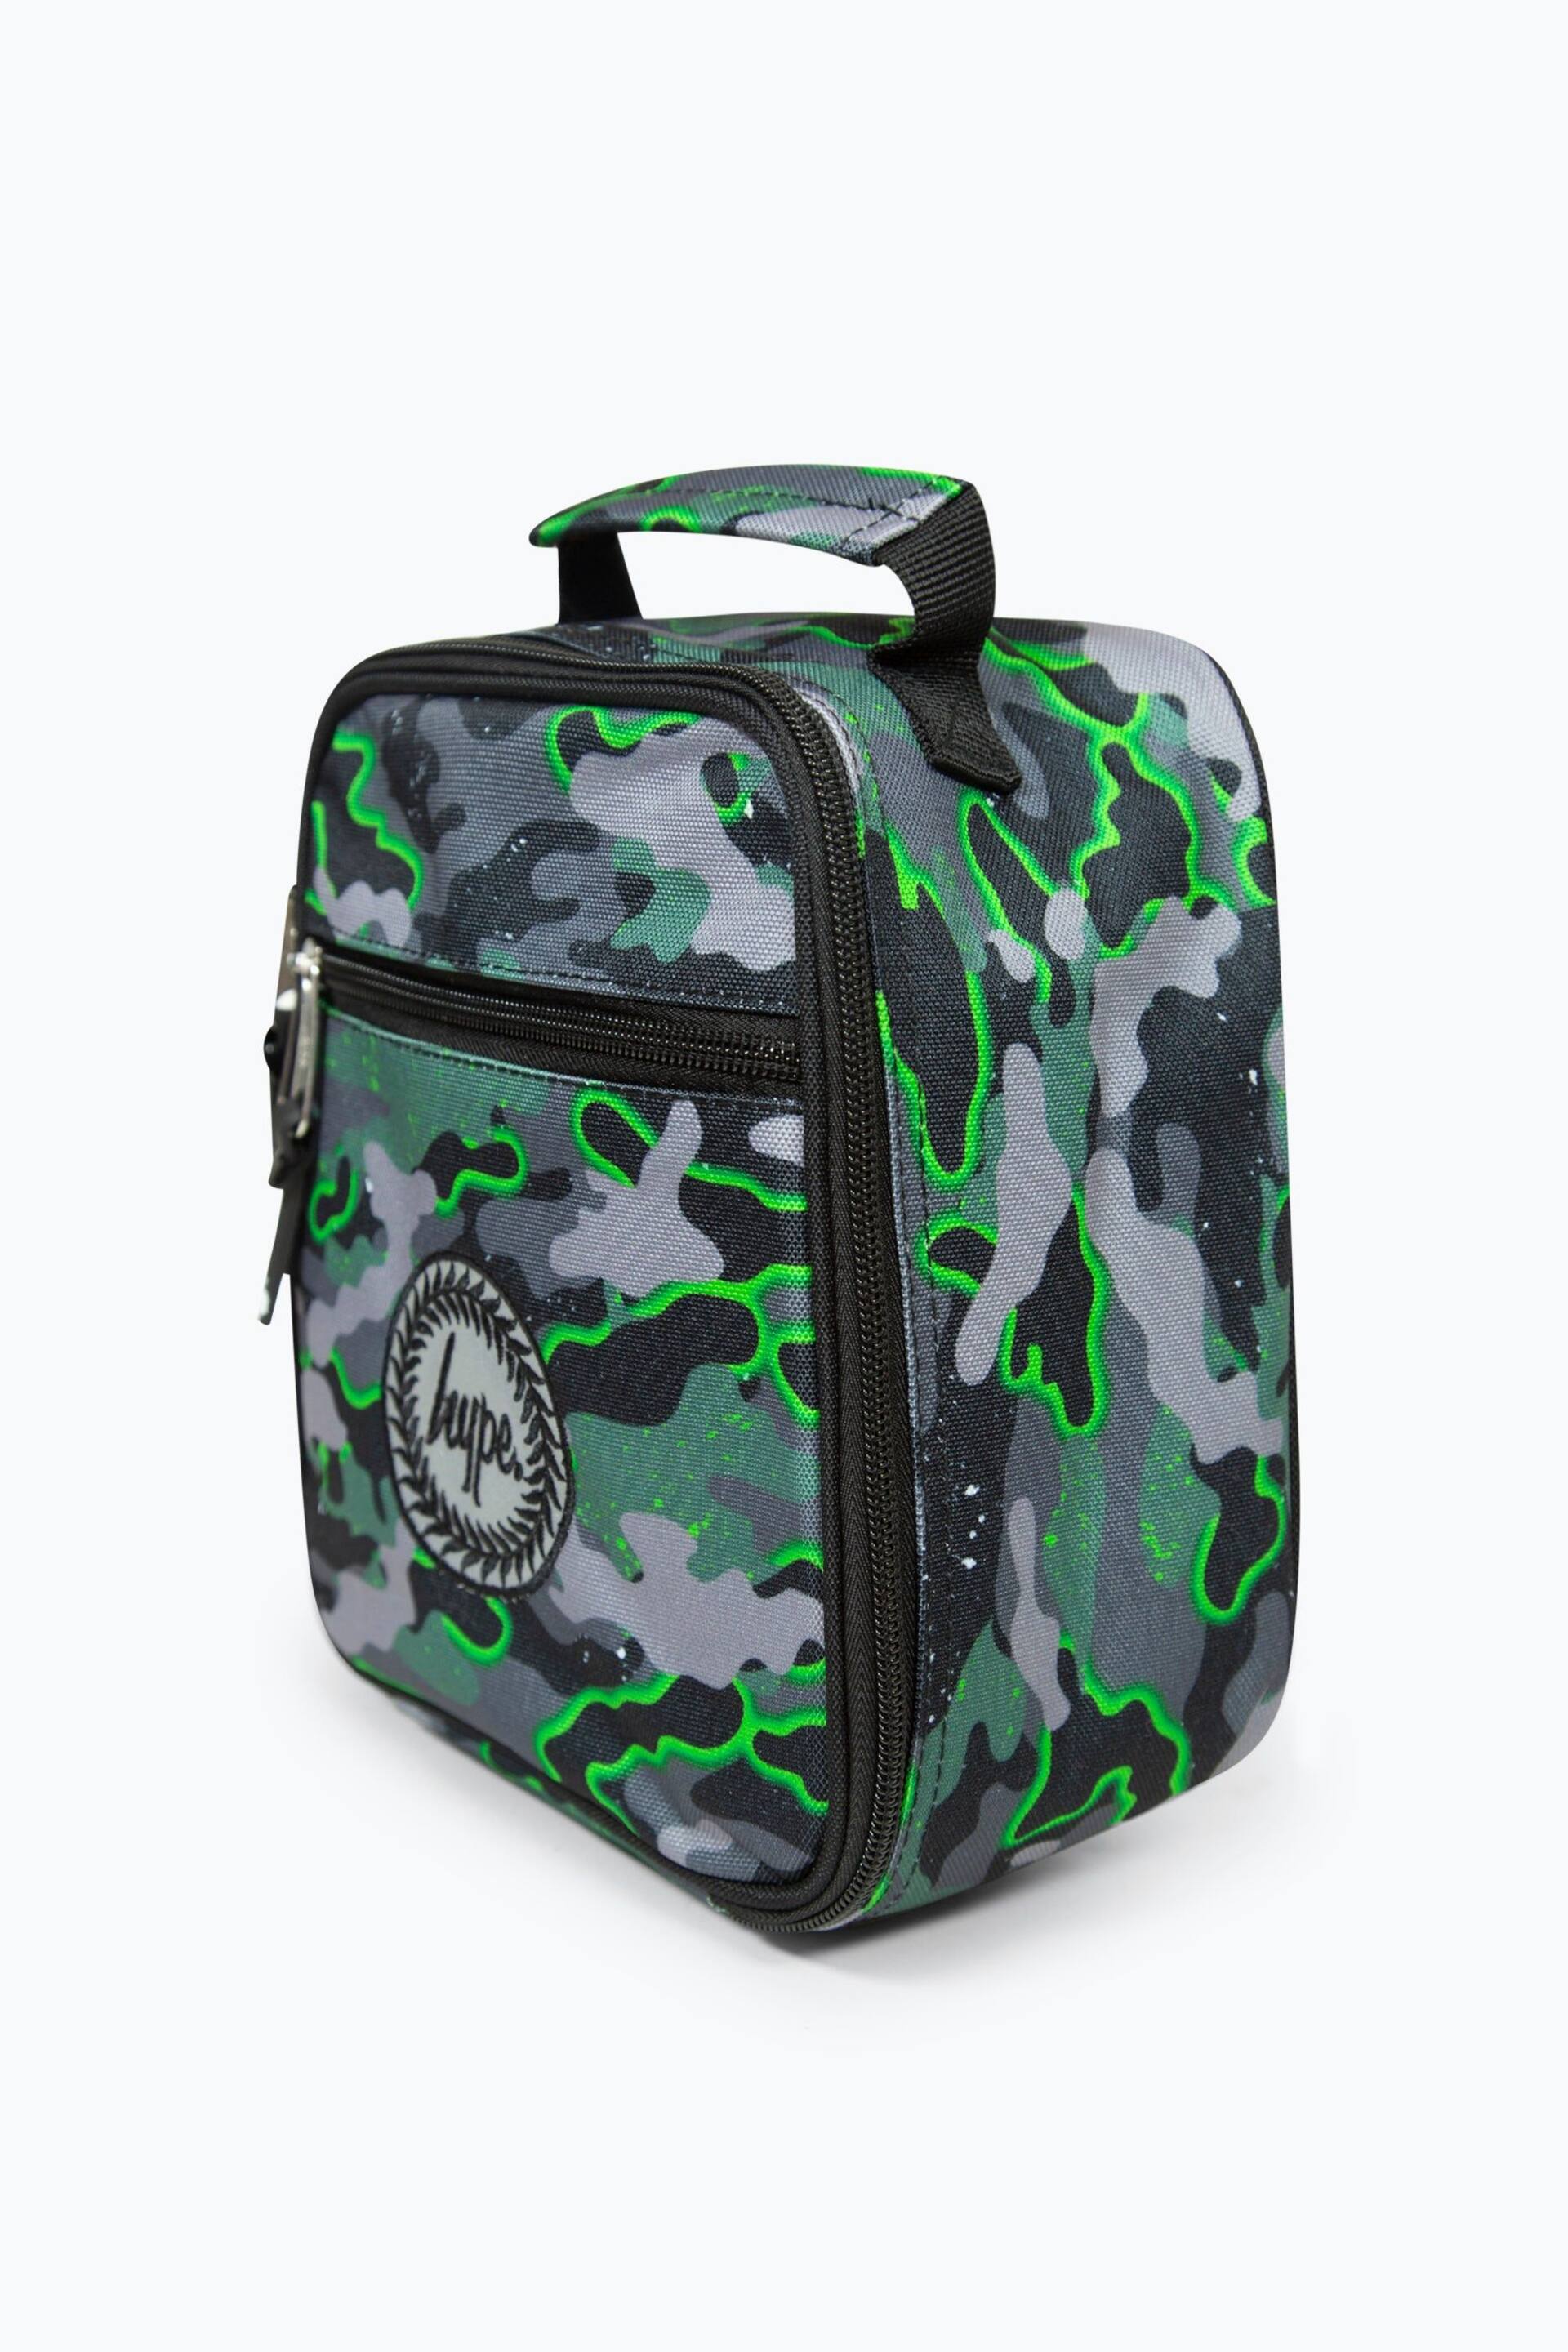 Hype. Glow Camo Lunch Box - Image 4 of 7